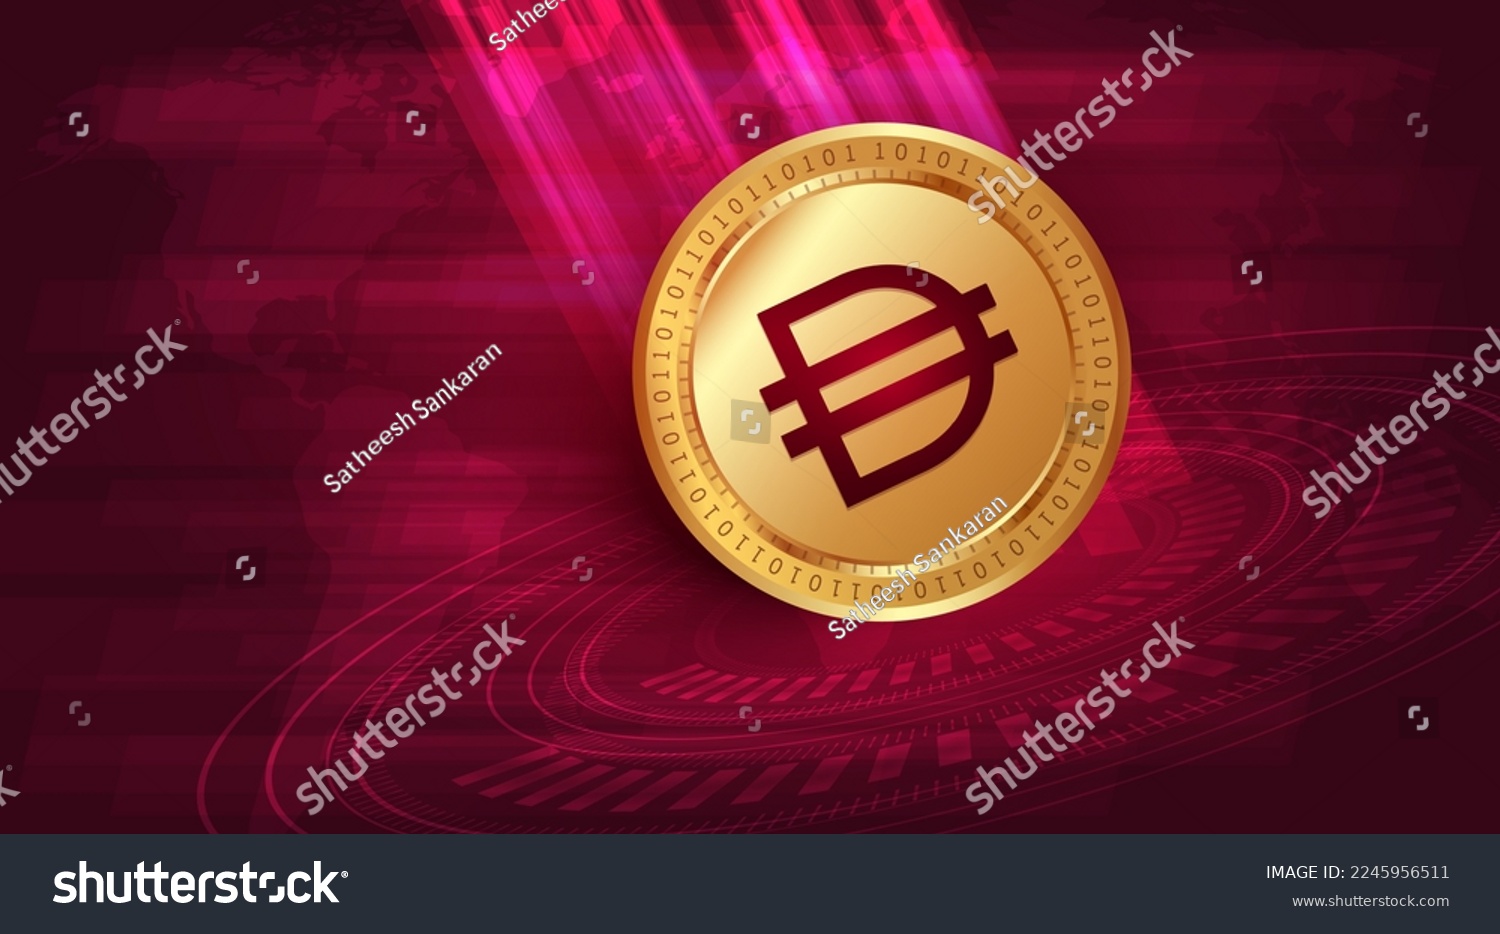 SVG of Dai (DAI) crypto currency banner and background svg